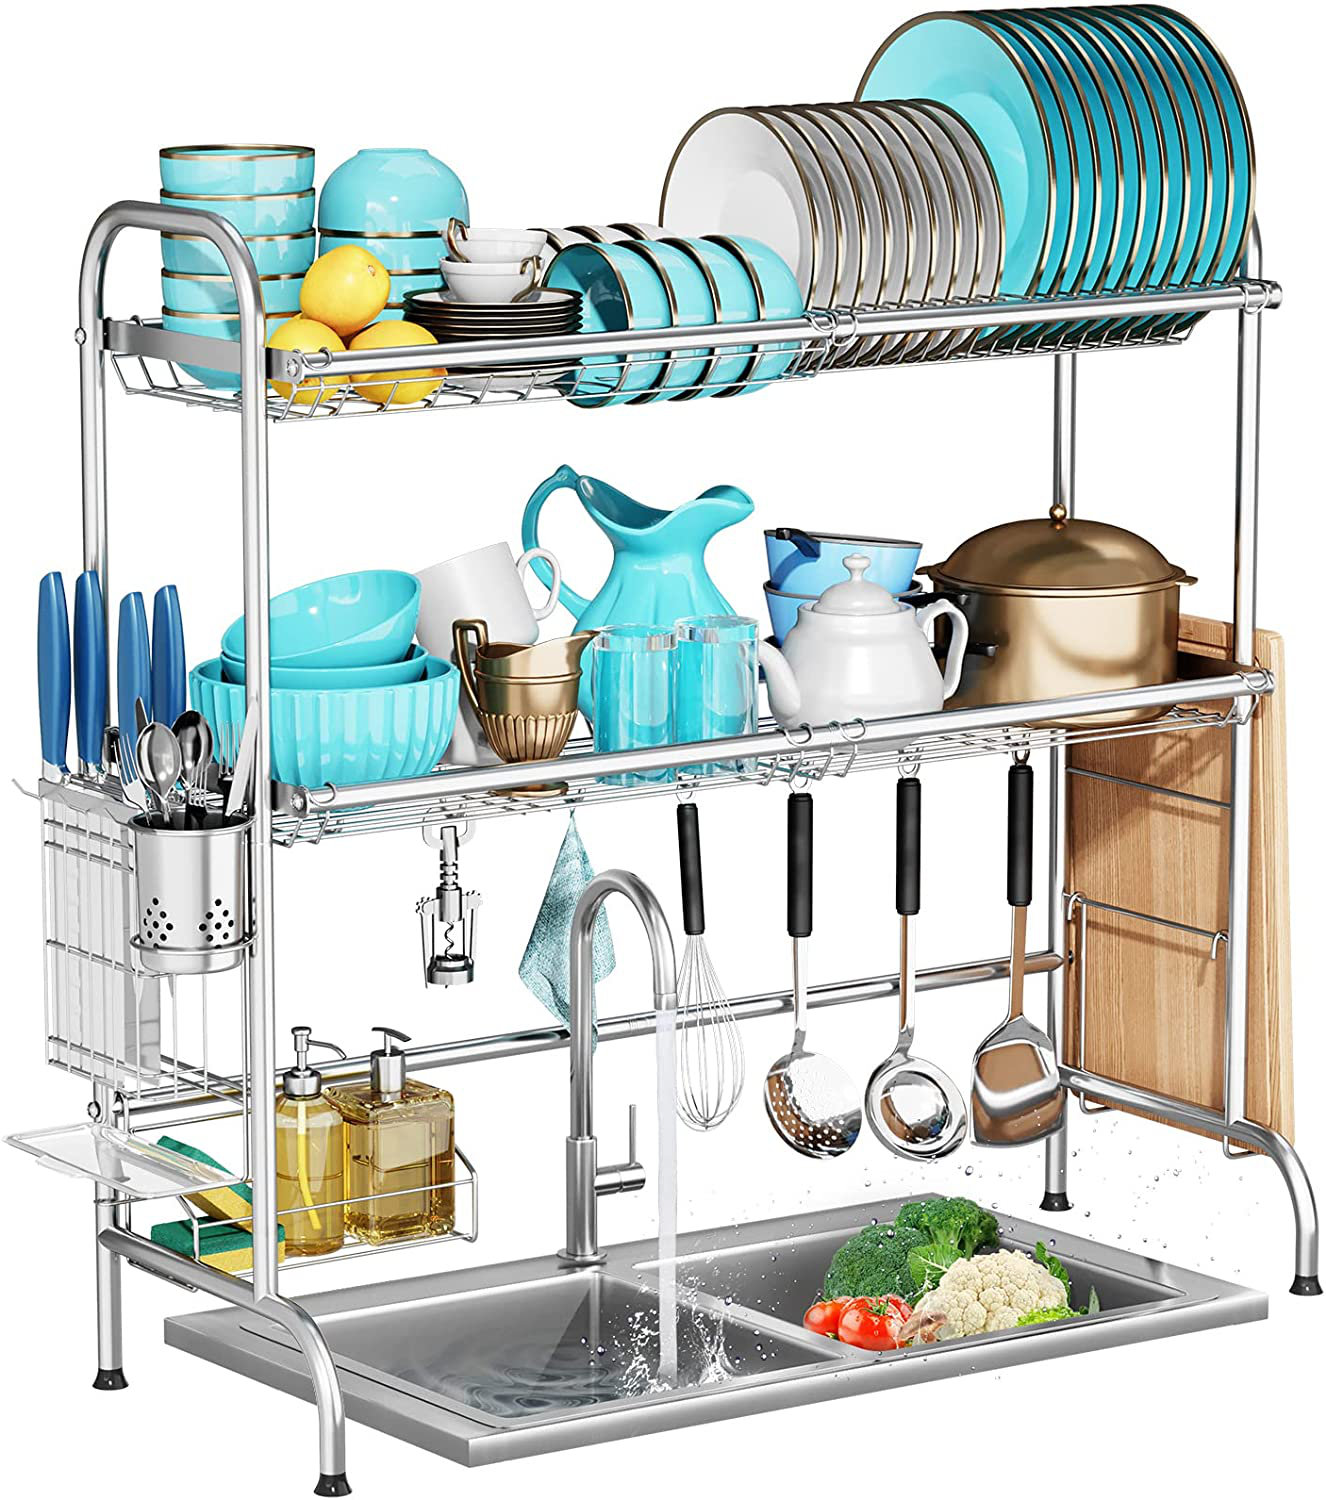 Lexi Home Over the Sink Adjustable Dish Rack Drainer - Black 